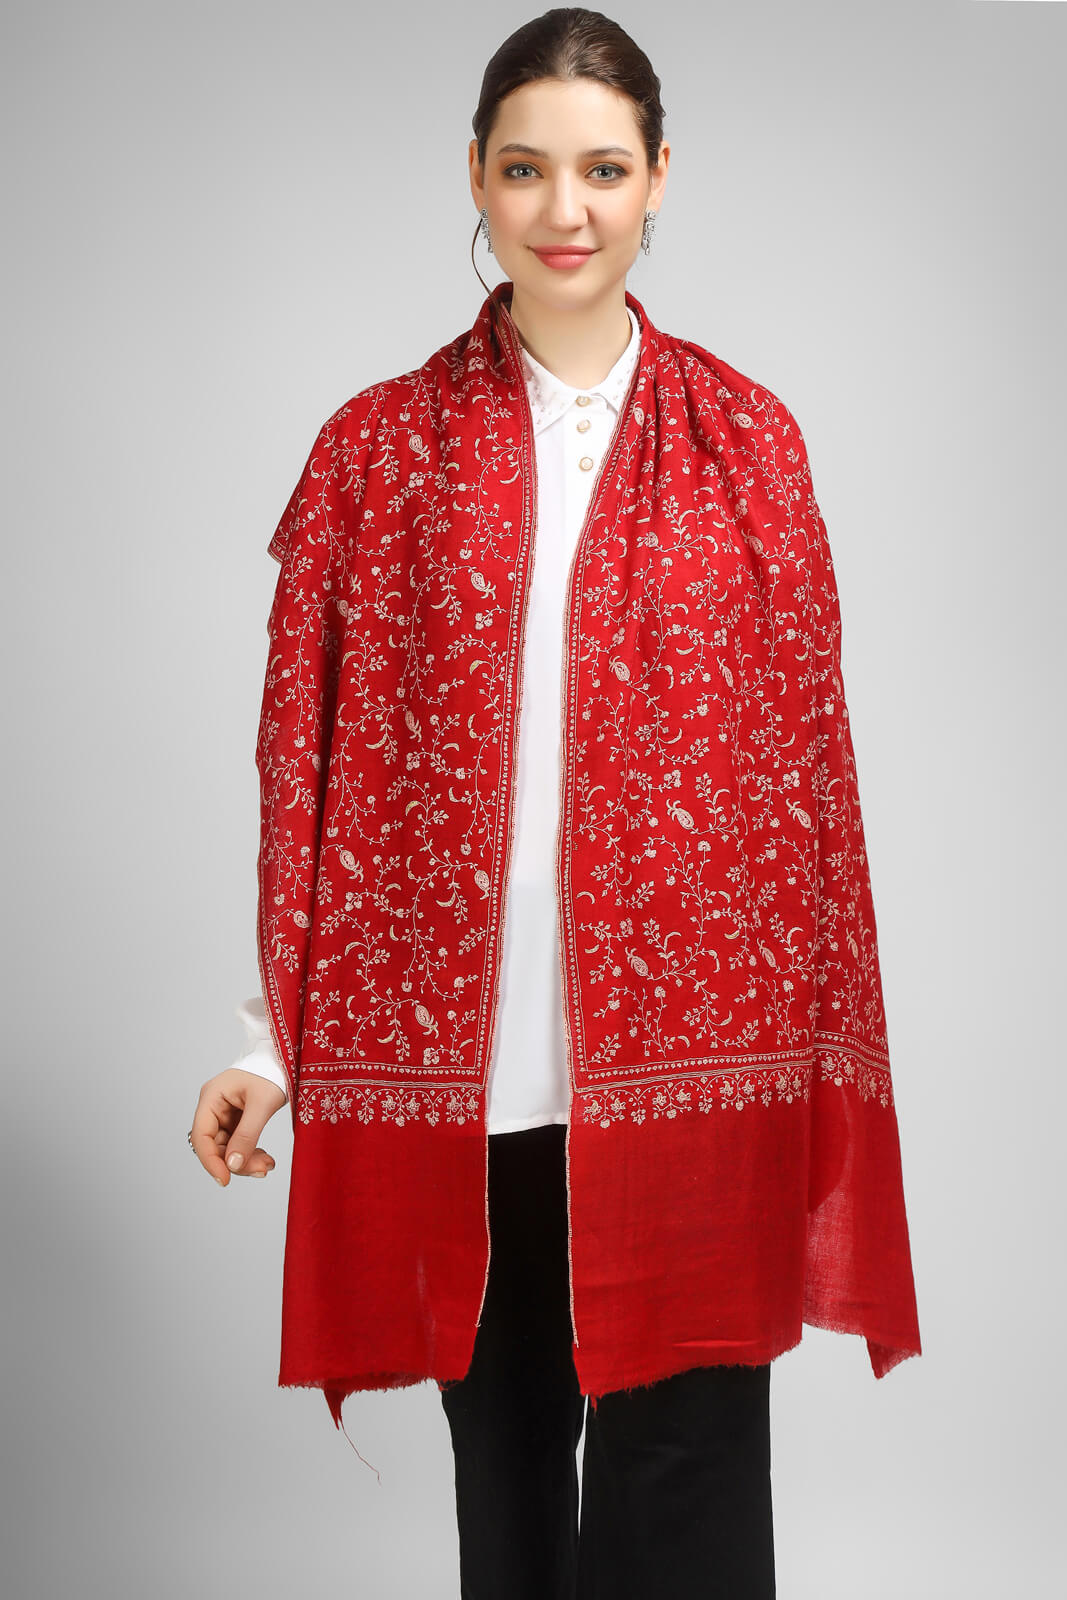 PASHMINA EMBROIDERY STOLE - Red Pashmina Jaldaar stole -  "We deliver exquisite products to your doorstep in the United States, China, Japan, Germany, United Kingdom, France, Canada, and Paris. Experience seamless international delivery with us."